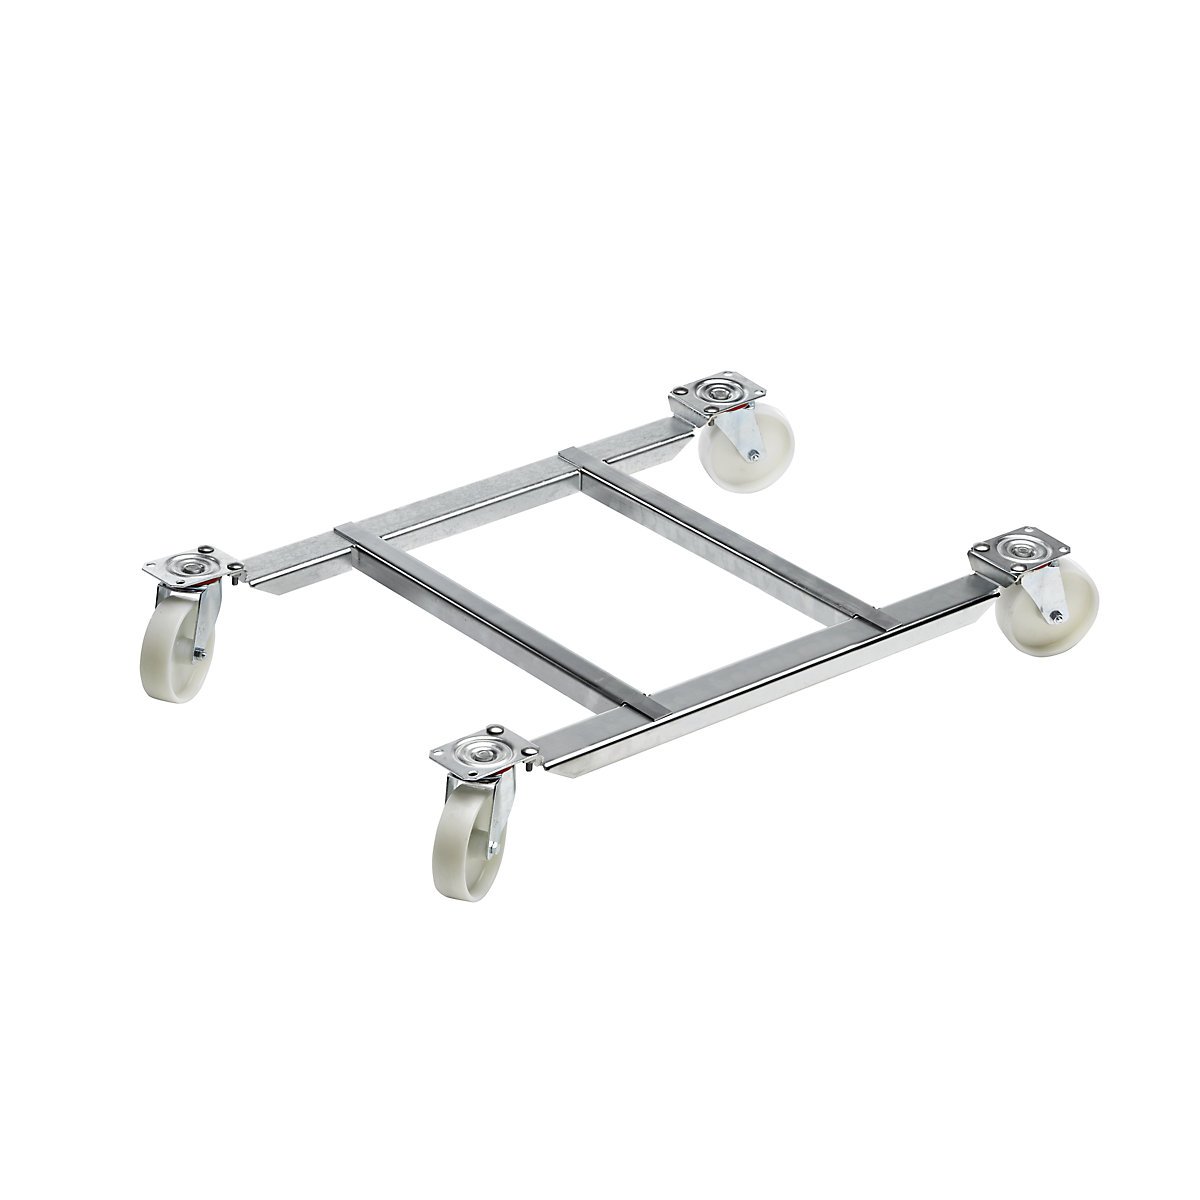 Roller stand – eurokraft pro: with steel roller, lifting range 610 – 970 mm